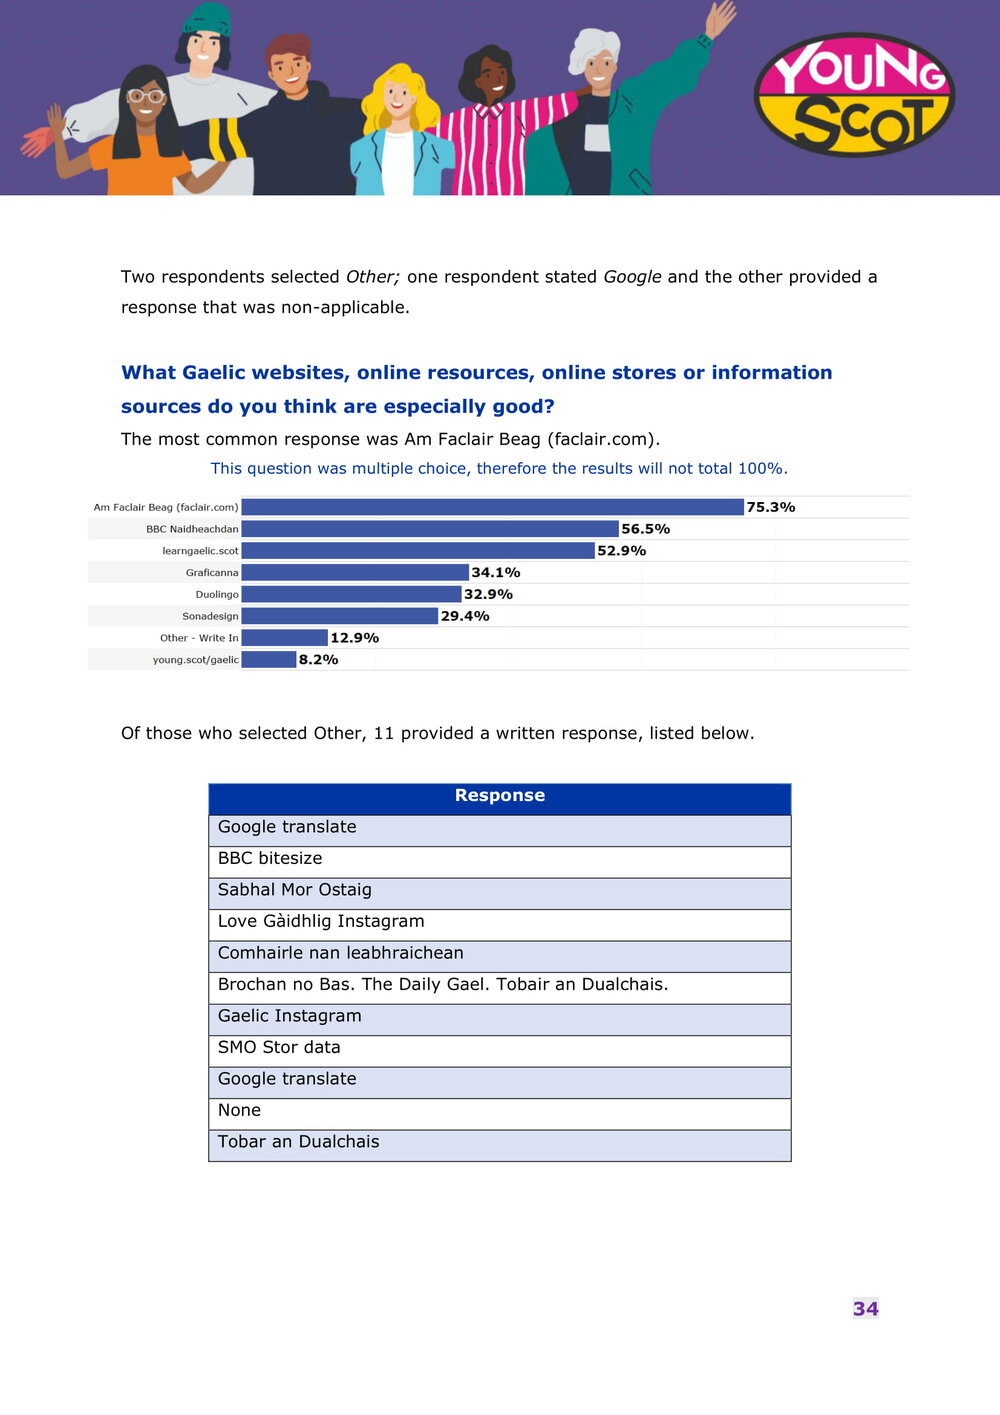 Engaging with Gaelic Online - Survey Results Report-35.jpg